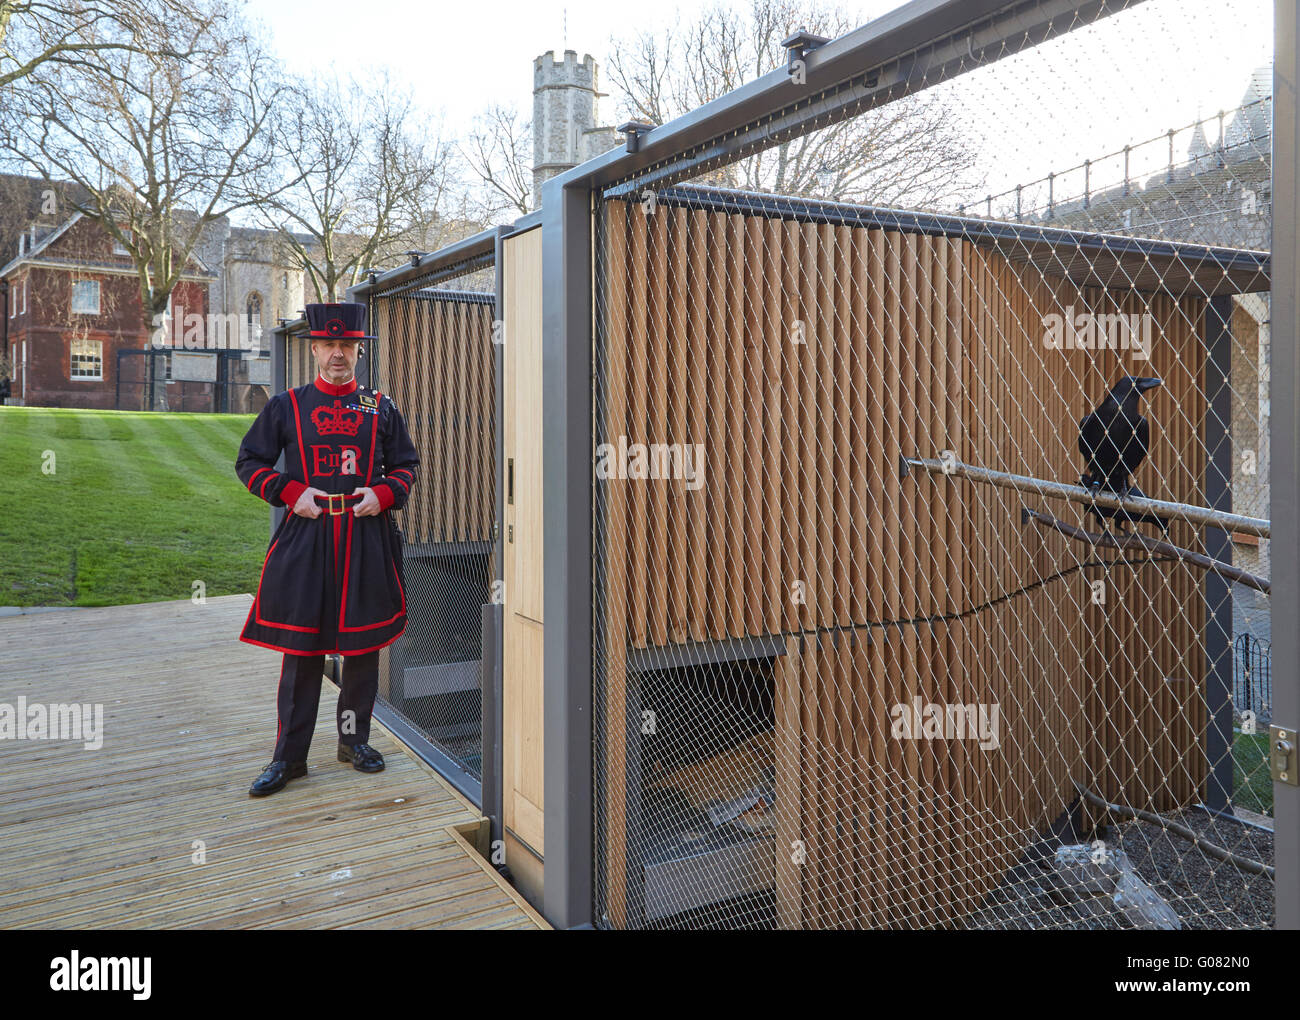 Raven master at feeding time. Ravens Night Enclosures at Tower of London, London, United Kingdom. Architect: llowarch and llowarch architects, 2015. Stock Photo